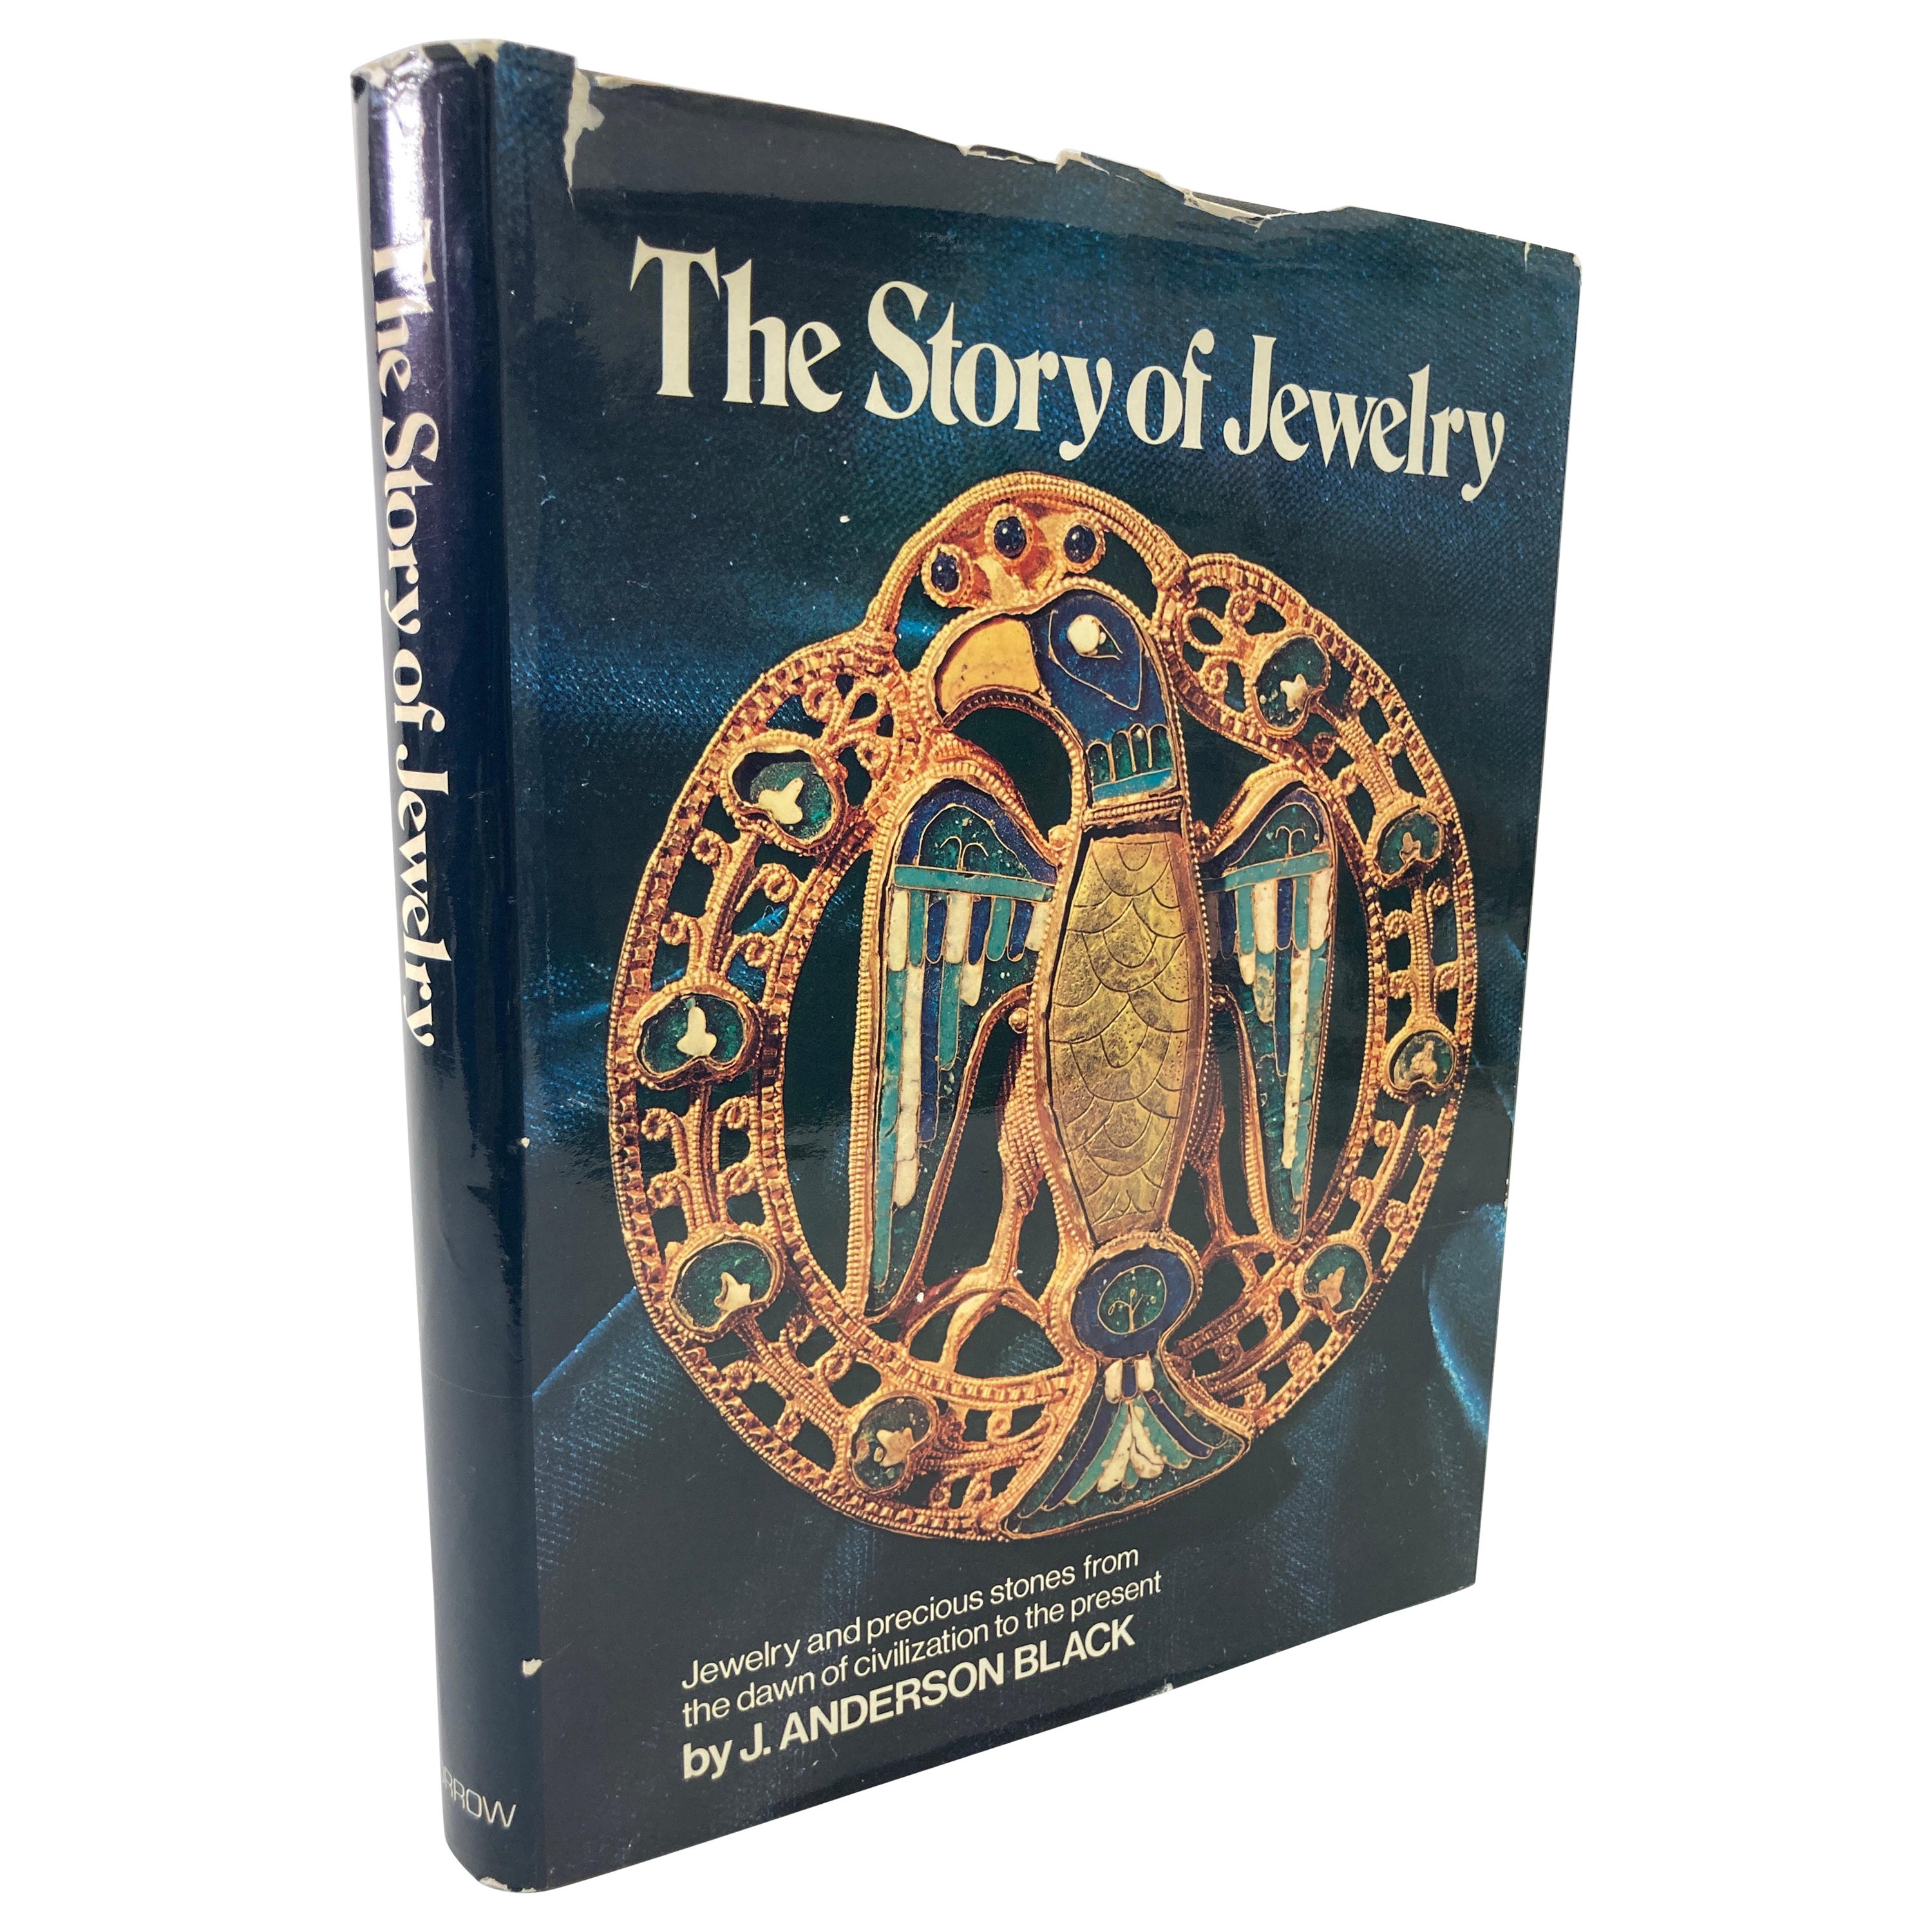 The Story of Jewelry 1st ED. 1973 by J. Anderson Hardcover Book